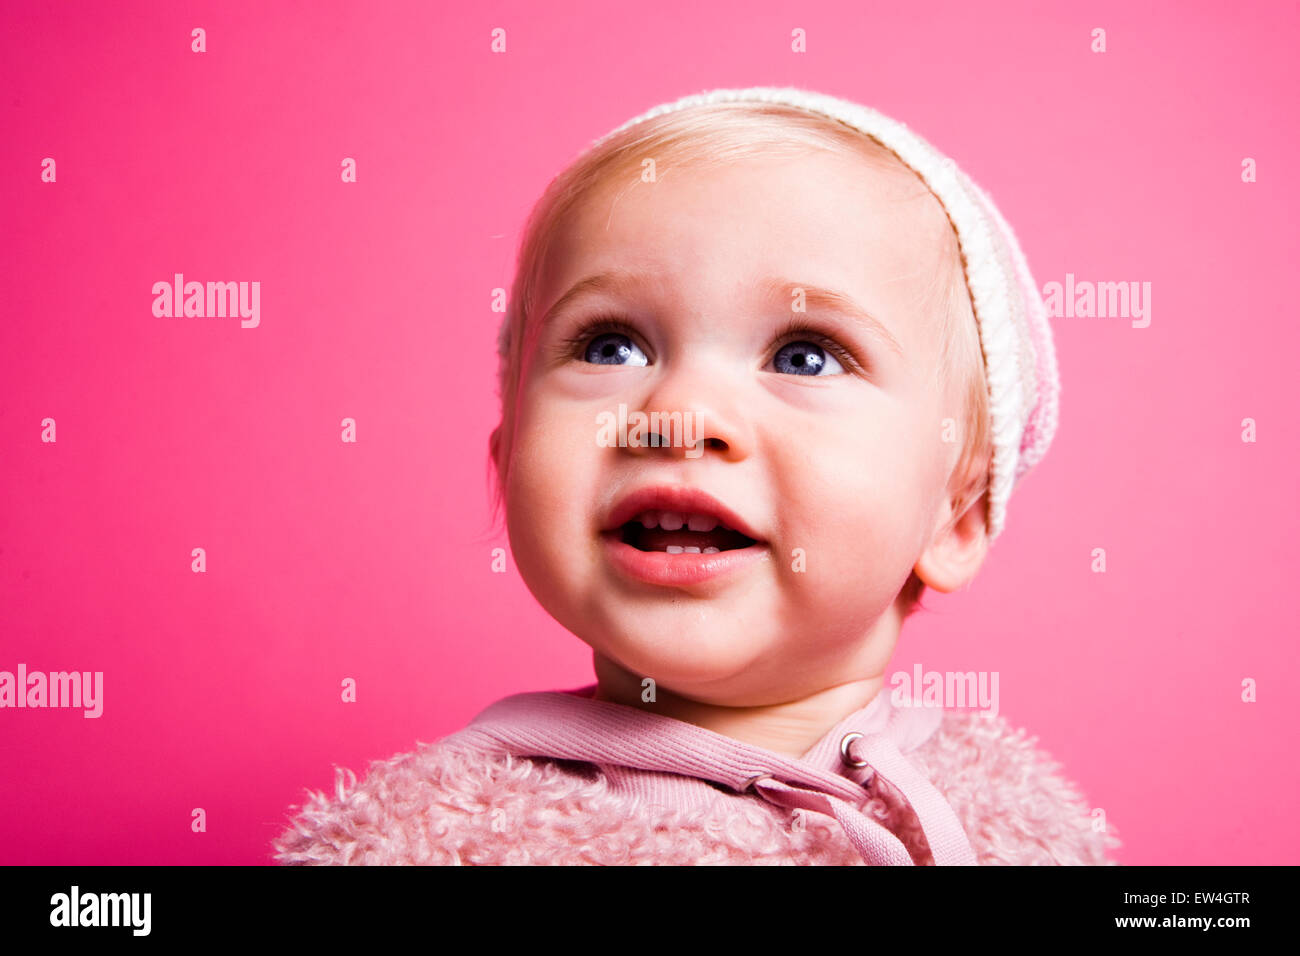 Portrait of a cute little girl (1 year old) on a pink backdrop Oceanside California. Stock Photo